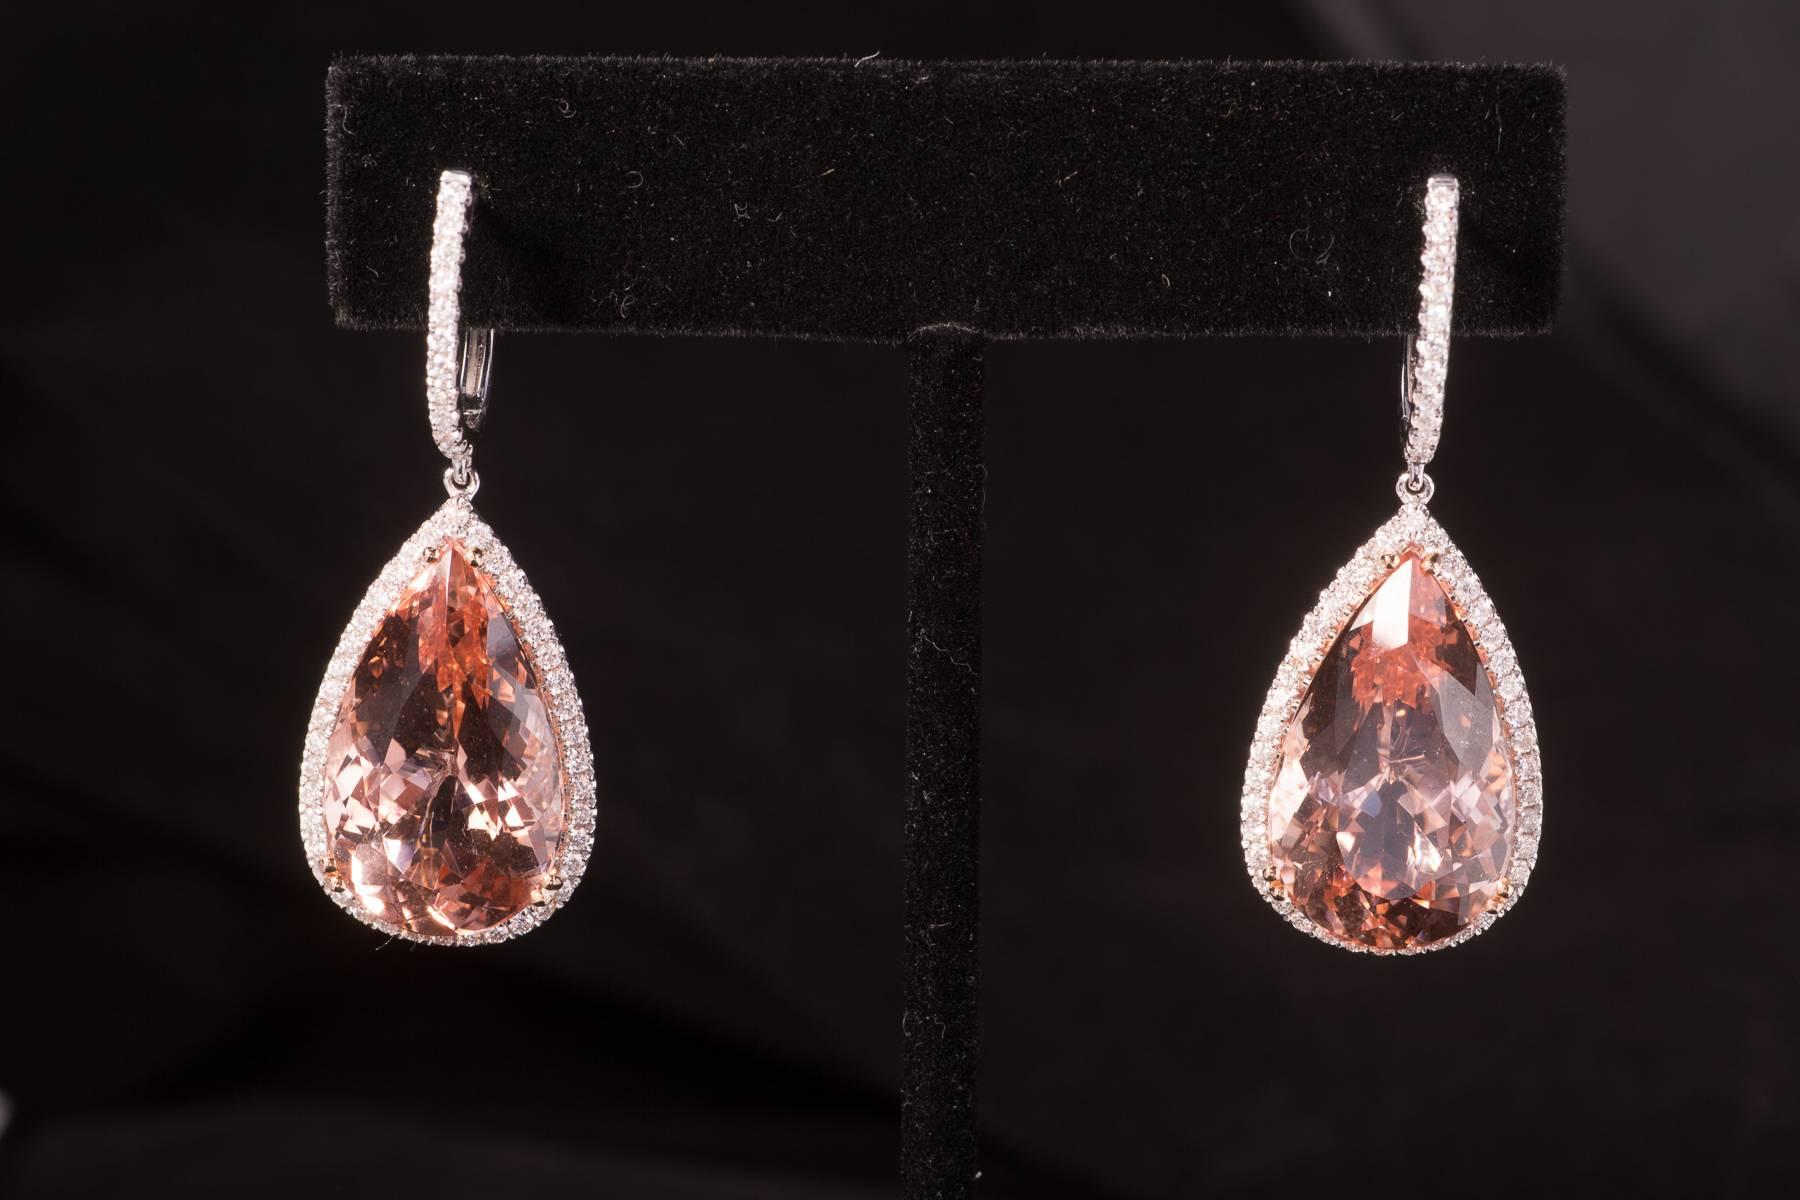 Magnificent, classic and contemporary Morganite and Diamond earrings. There are  28.74cts of Morganite, 1.05cts of  sparkling white Diamonds. The earrings are set in 18k rose gold.
Morganite is from the Beryl family of gems which the Emerald is